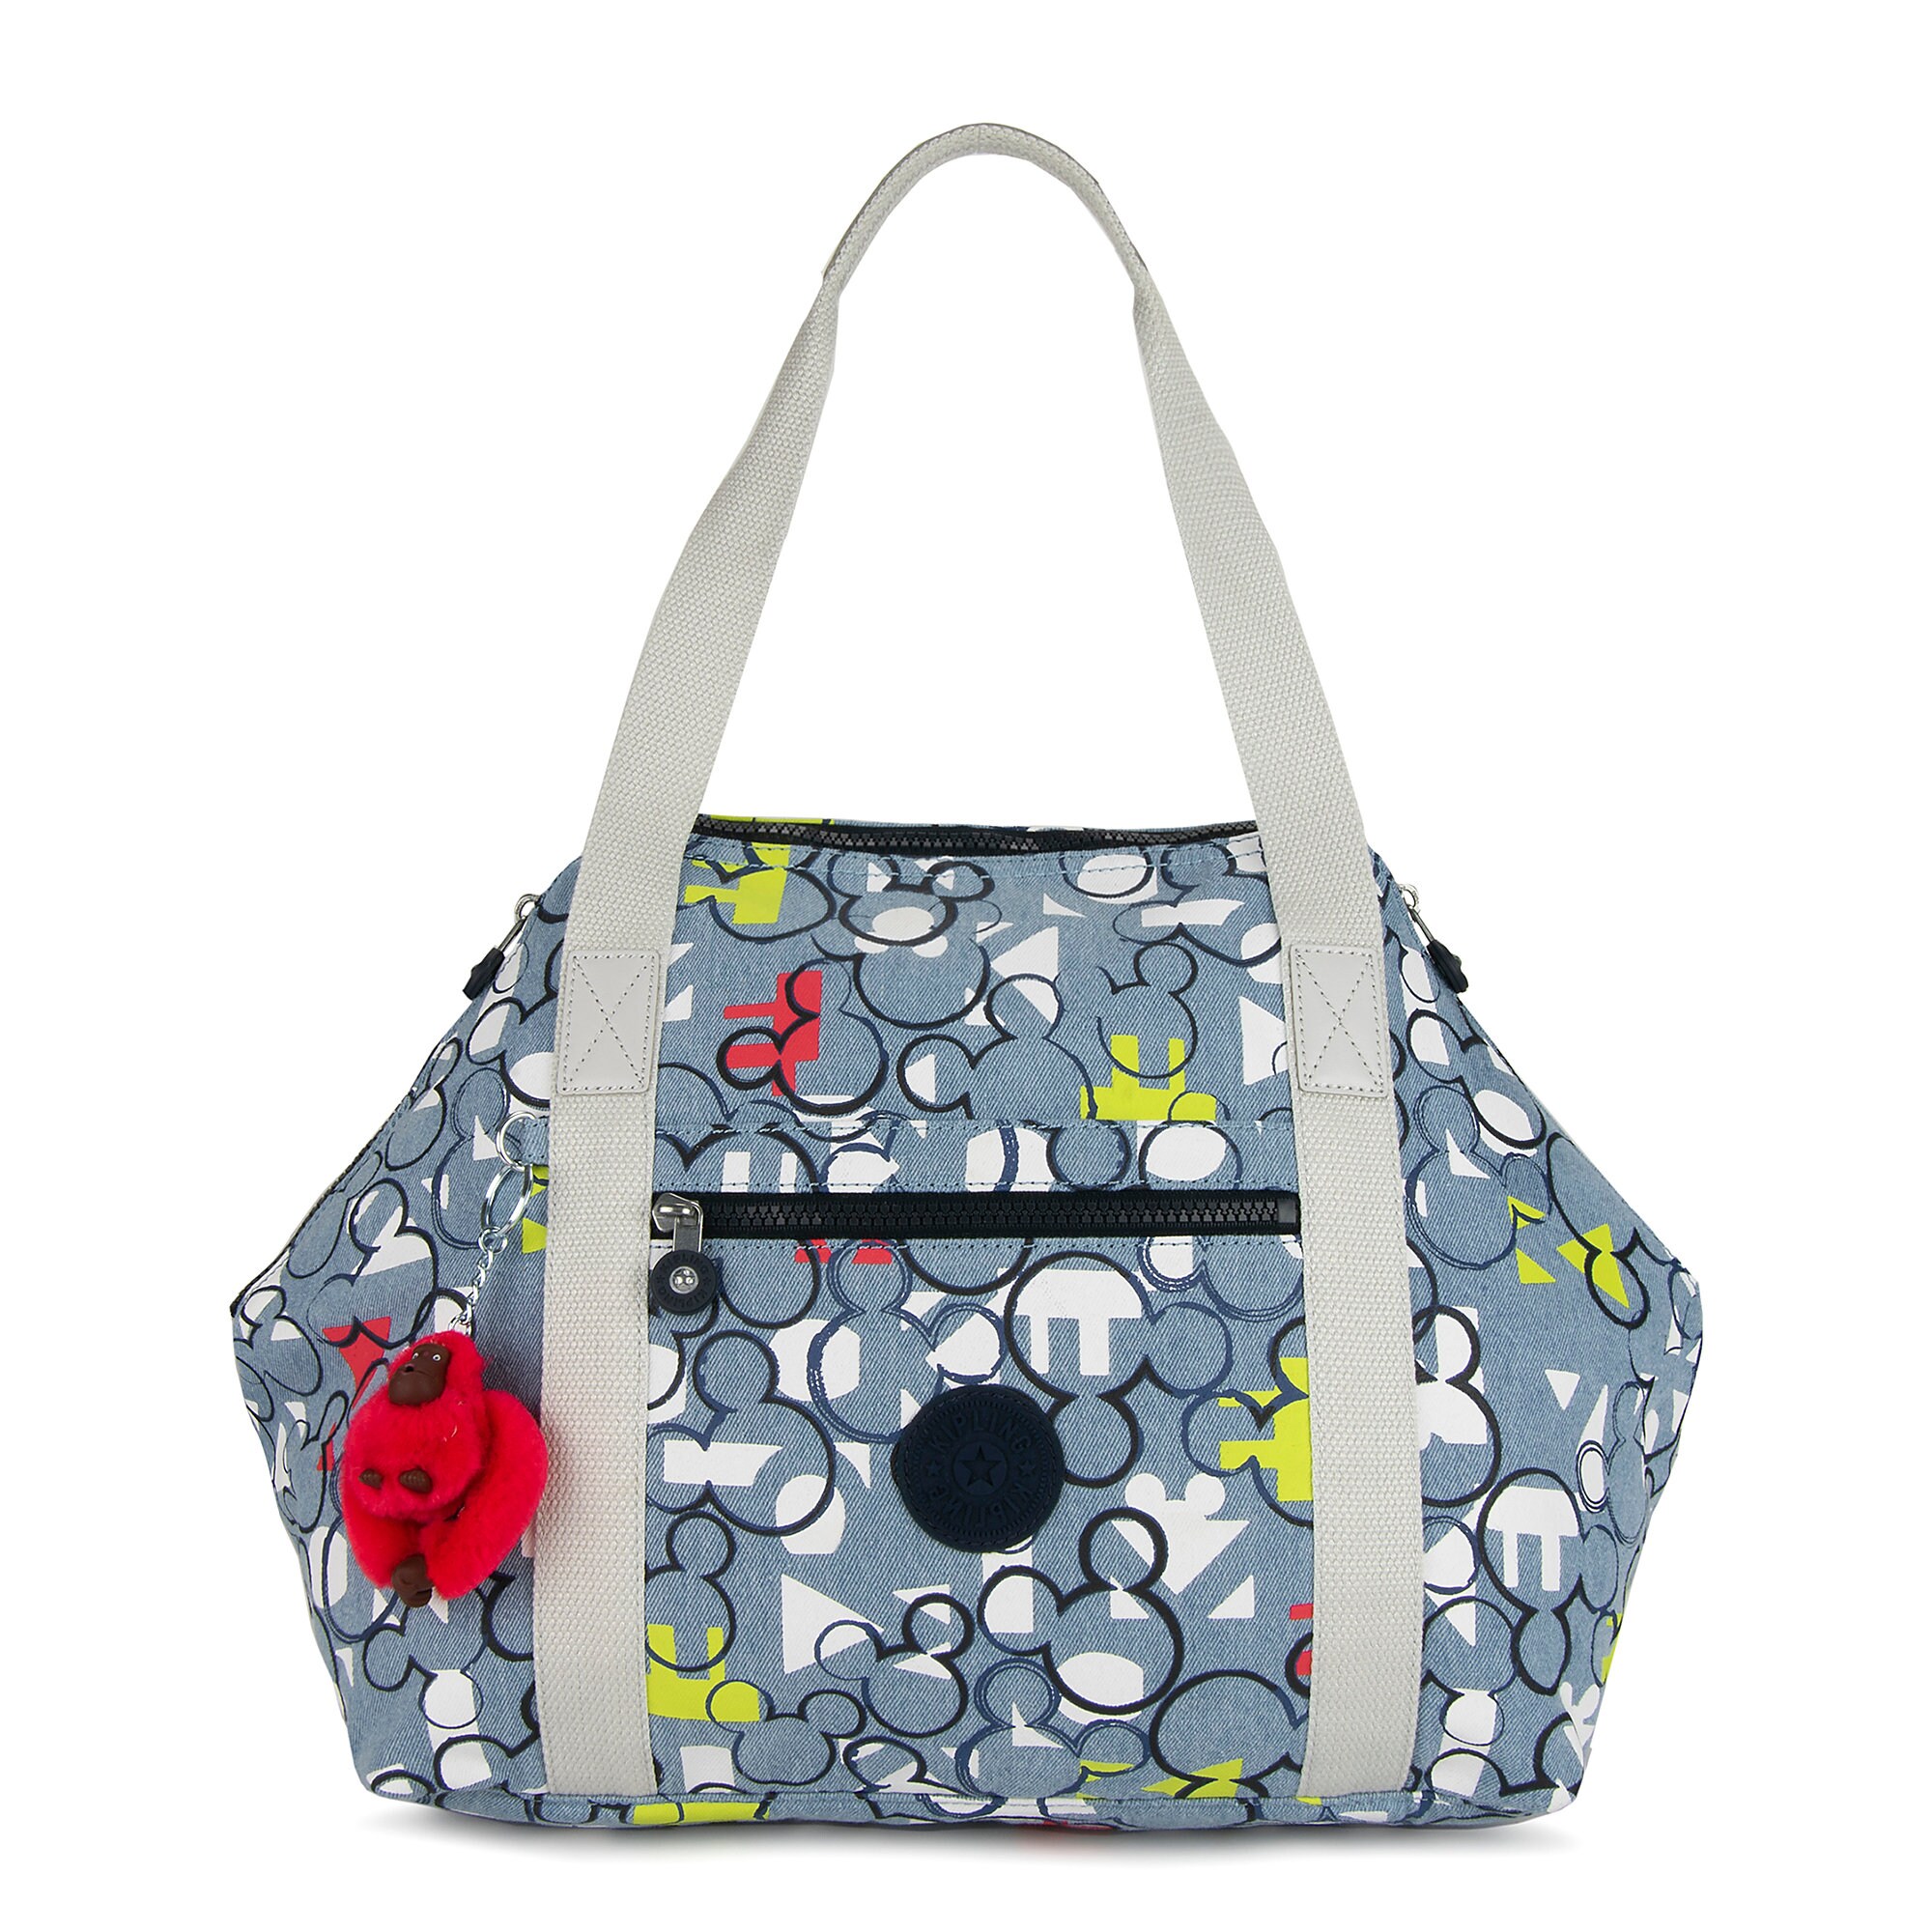 Mickey Mouse Duffle Bag by Kipling